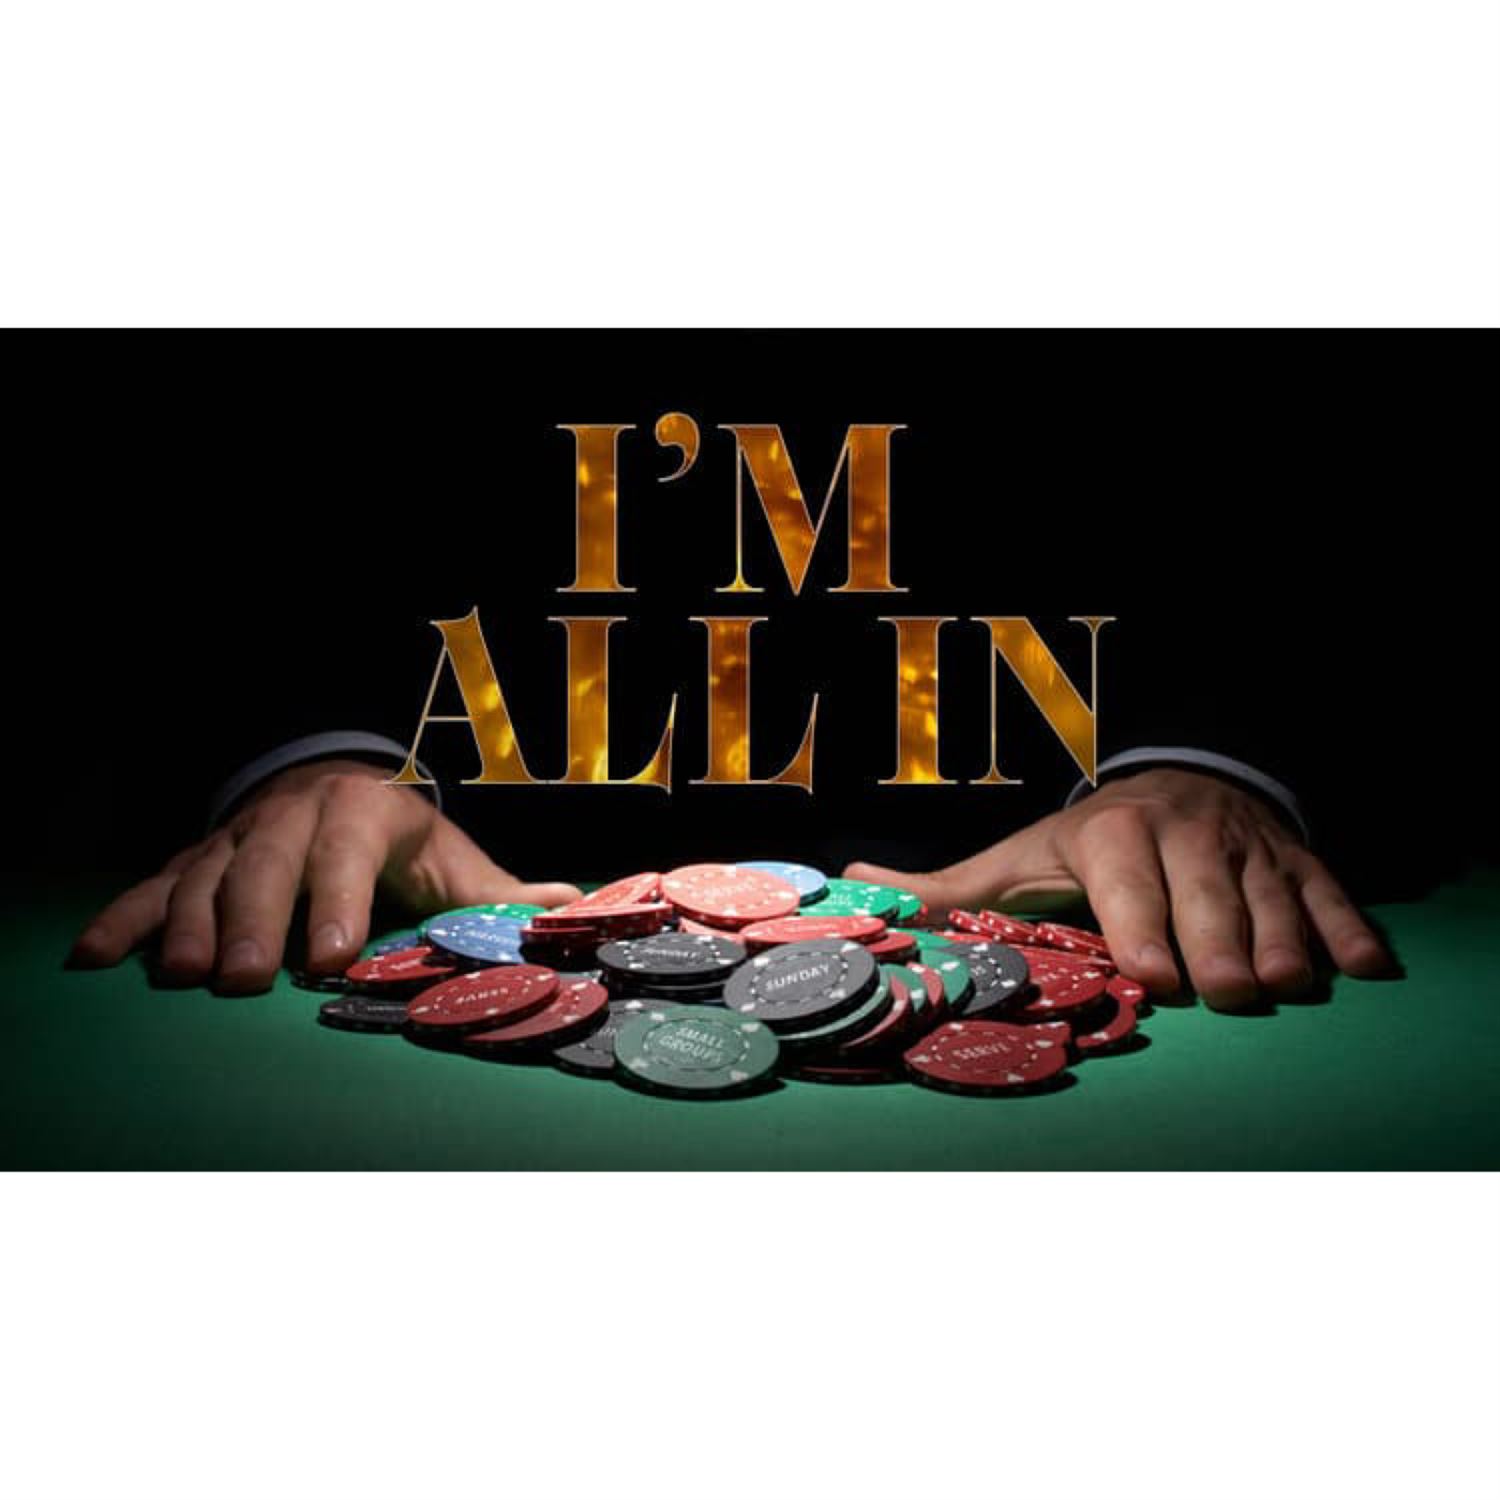 Defining 'going all in'